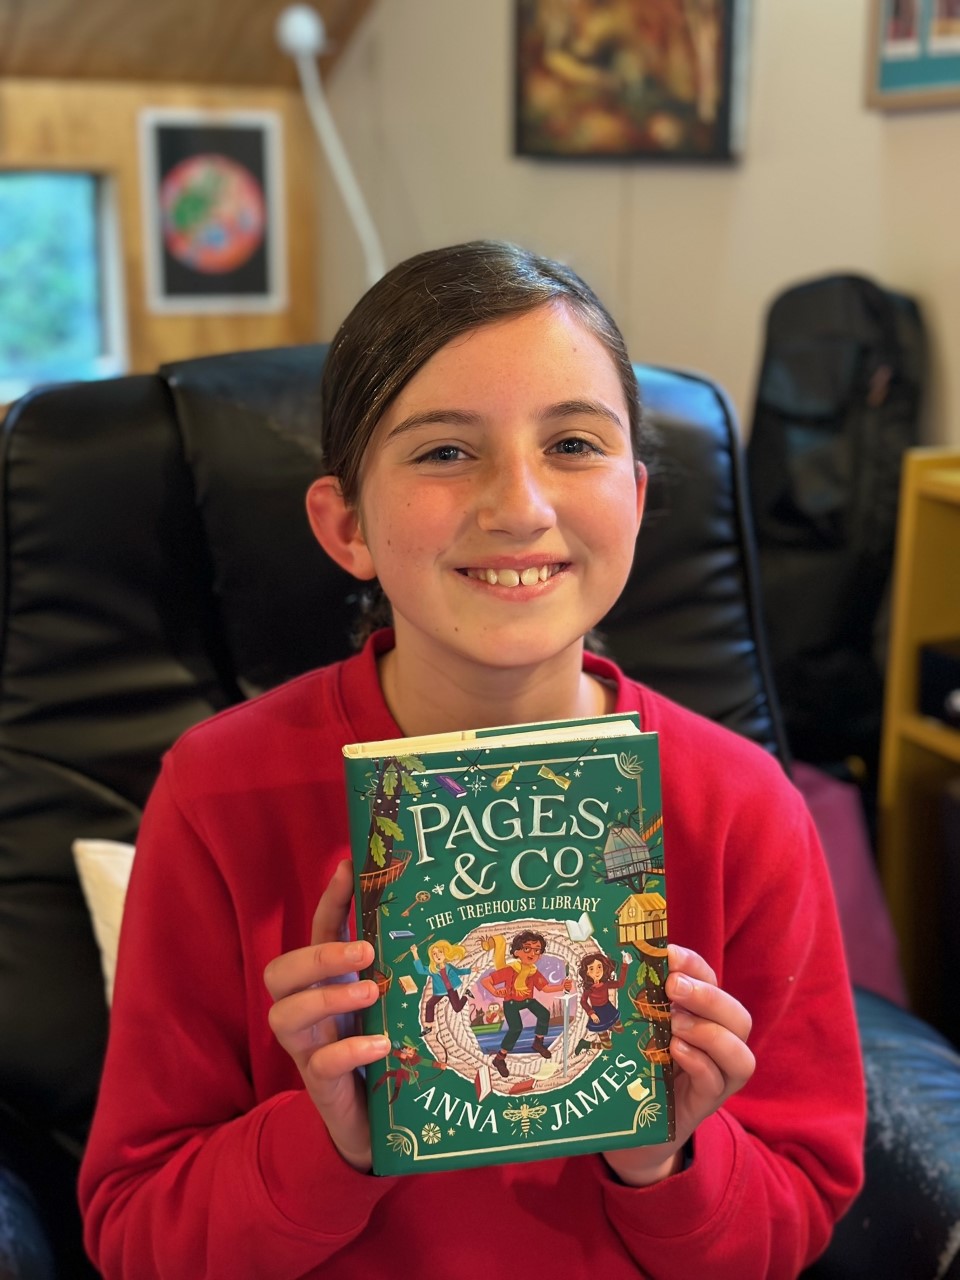 Pages & Co The Treehouse Library by Anna James review